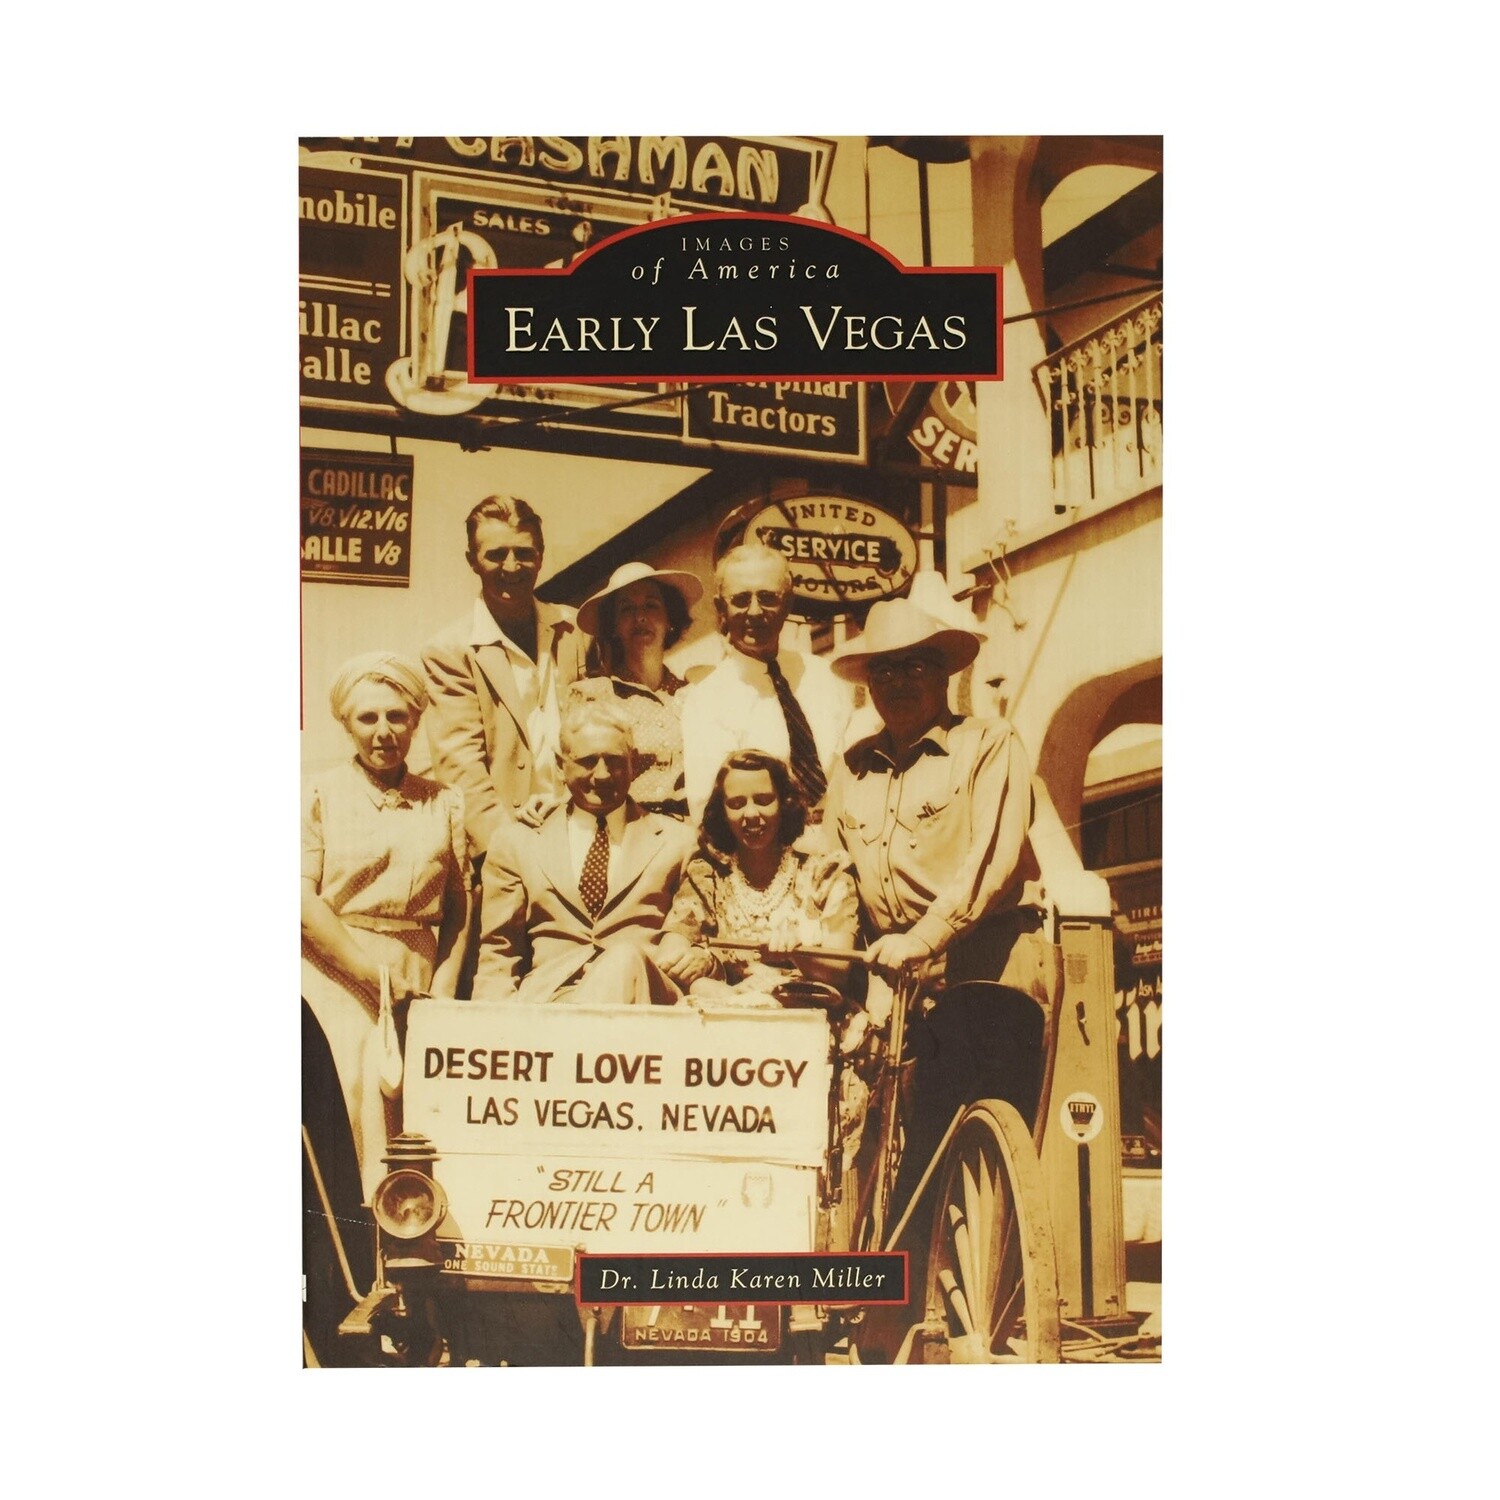 Images of America: Early Las Vegas by Early Las Vegas